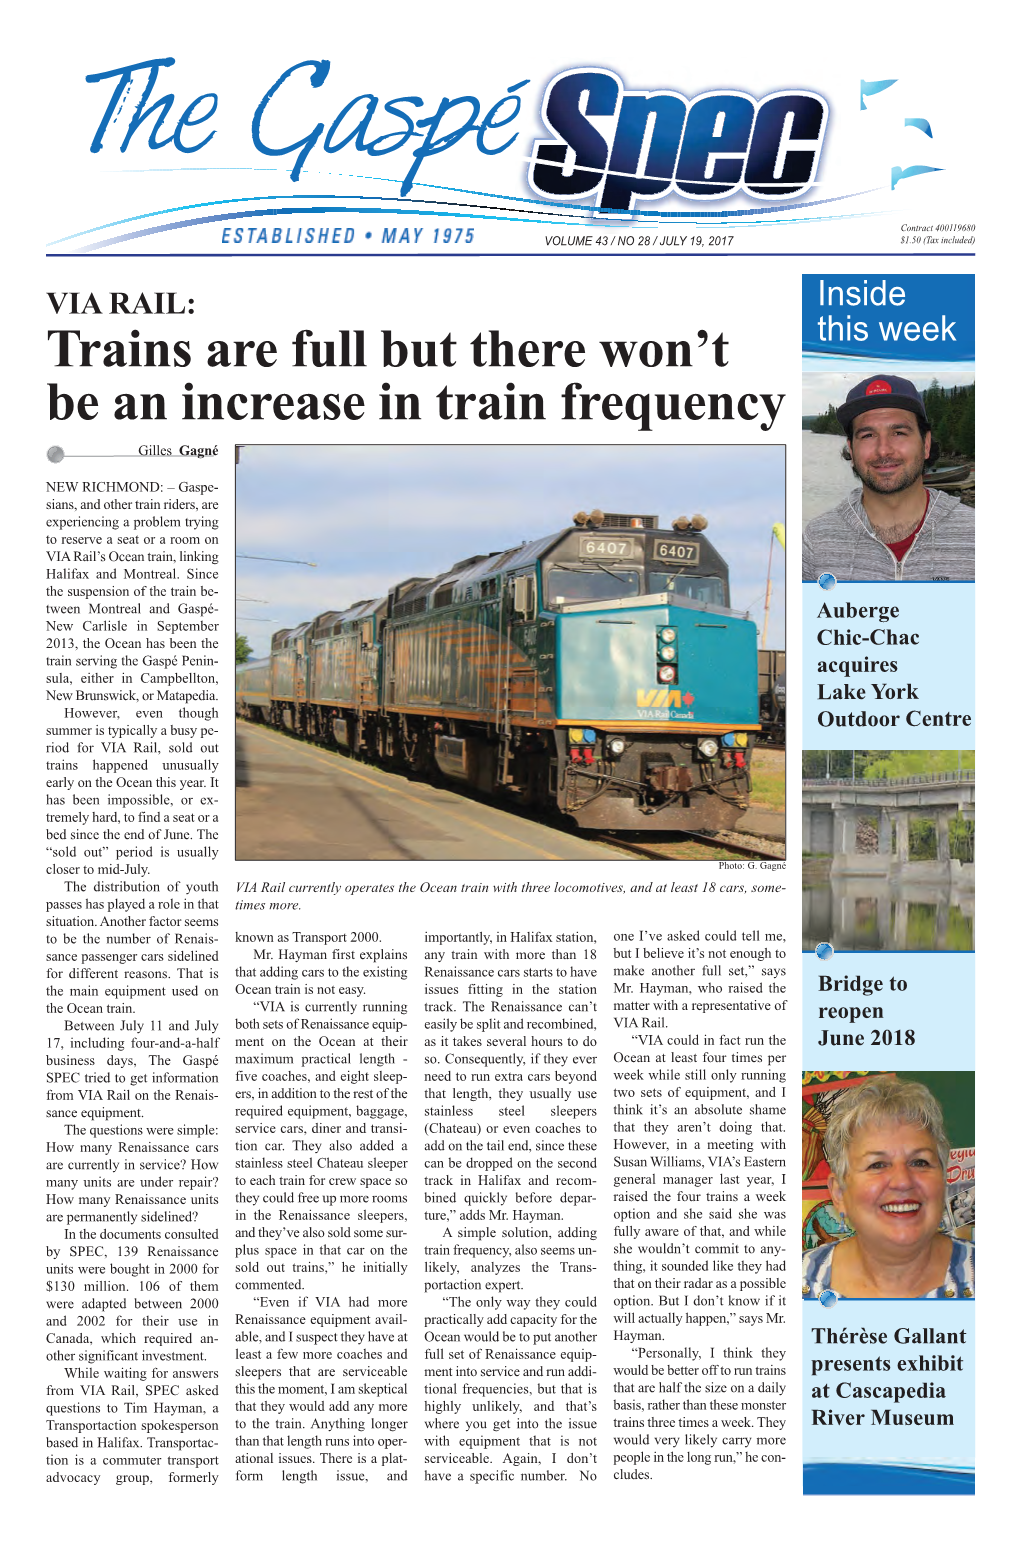 Trains Are Full but There Won't Be an Increase in Train Frequency